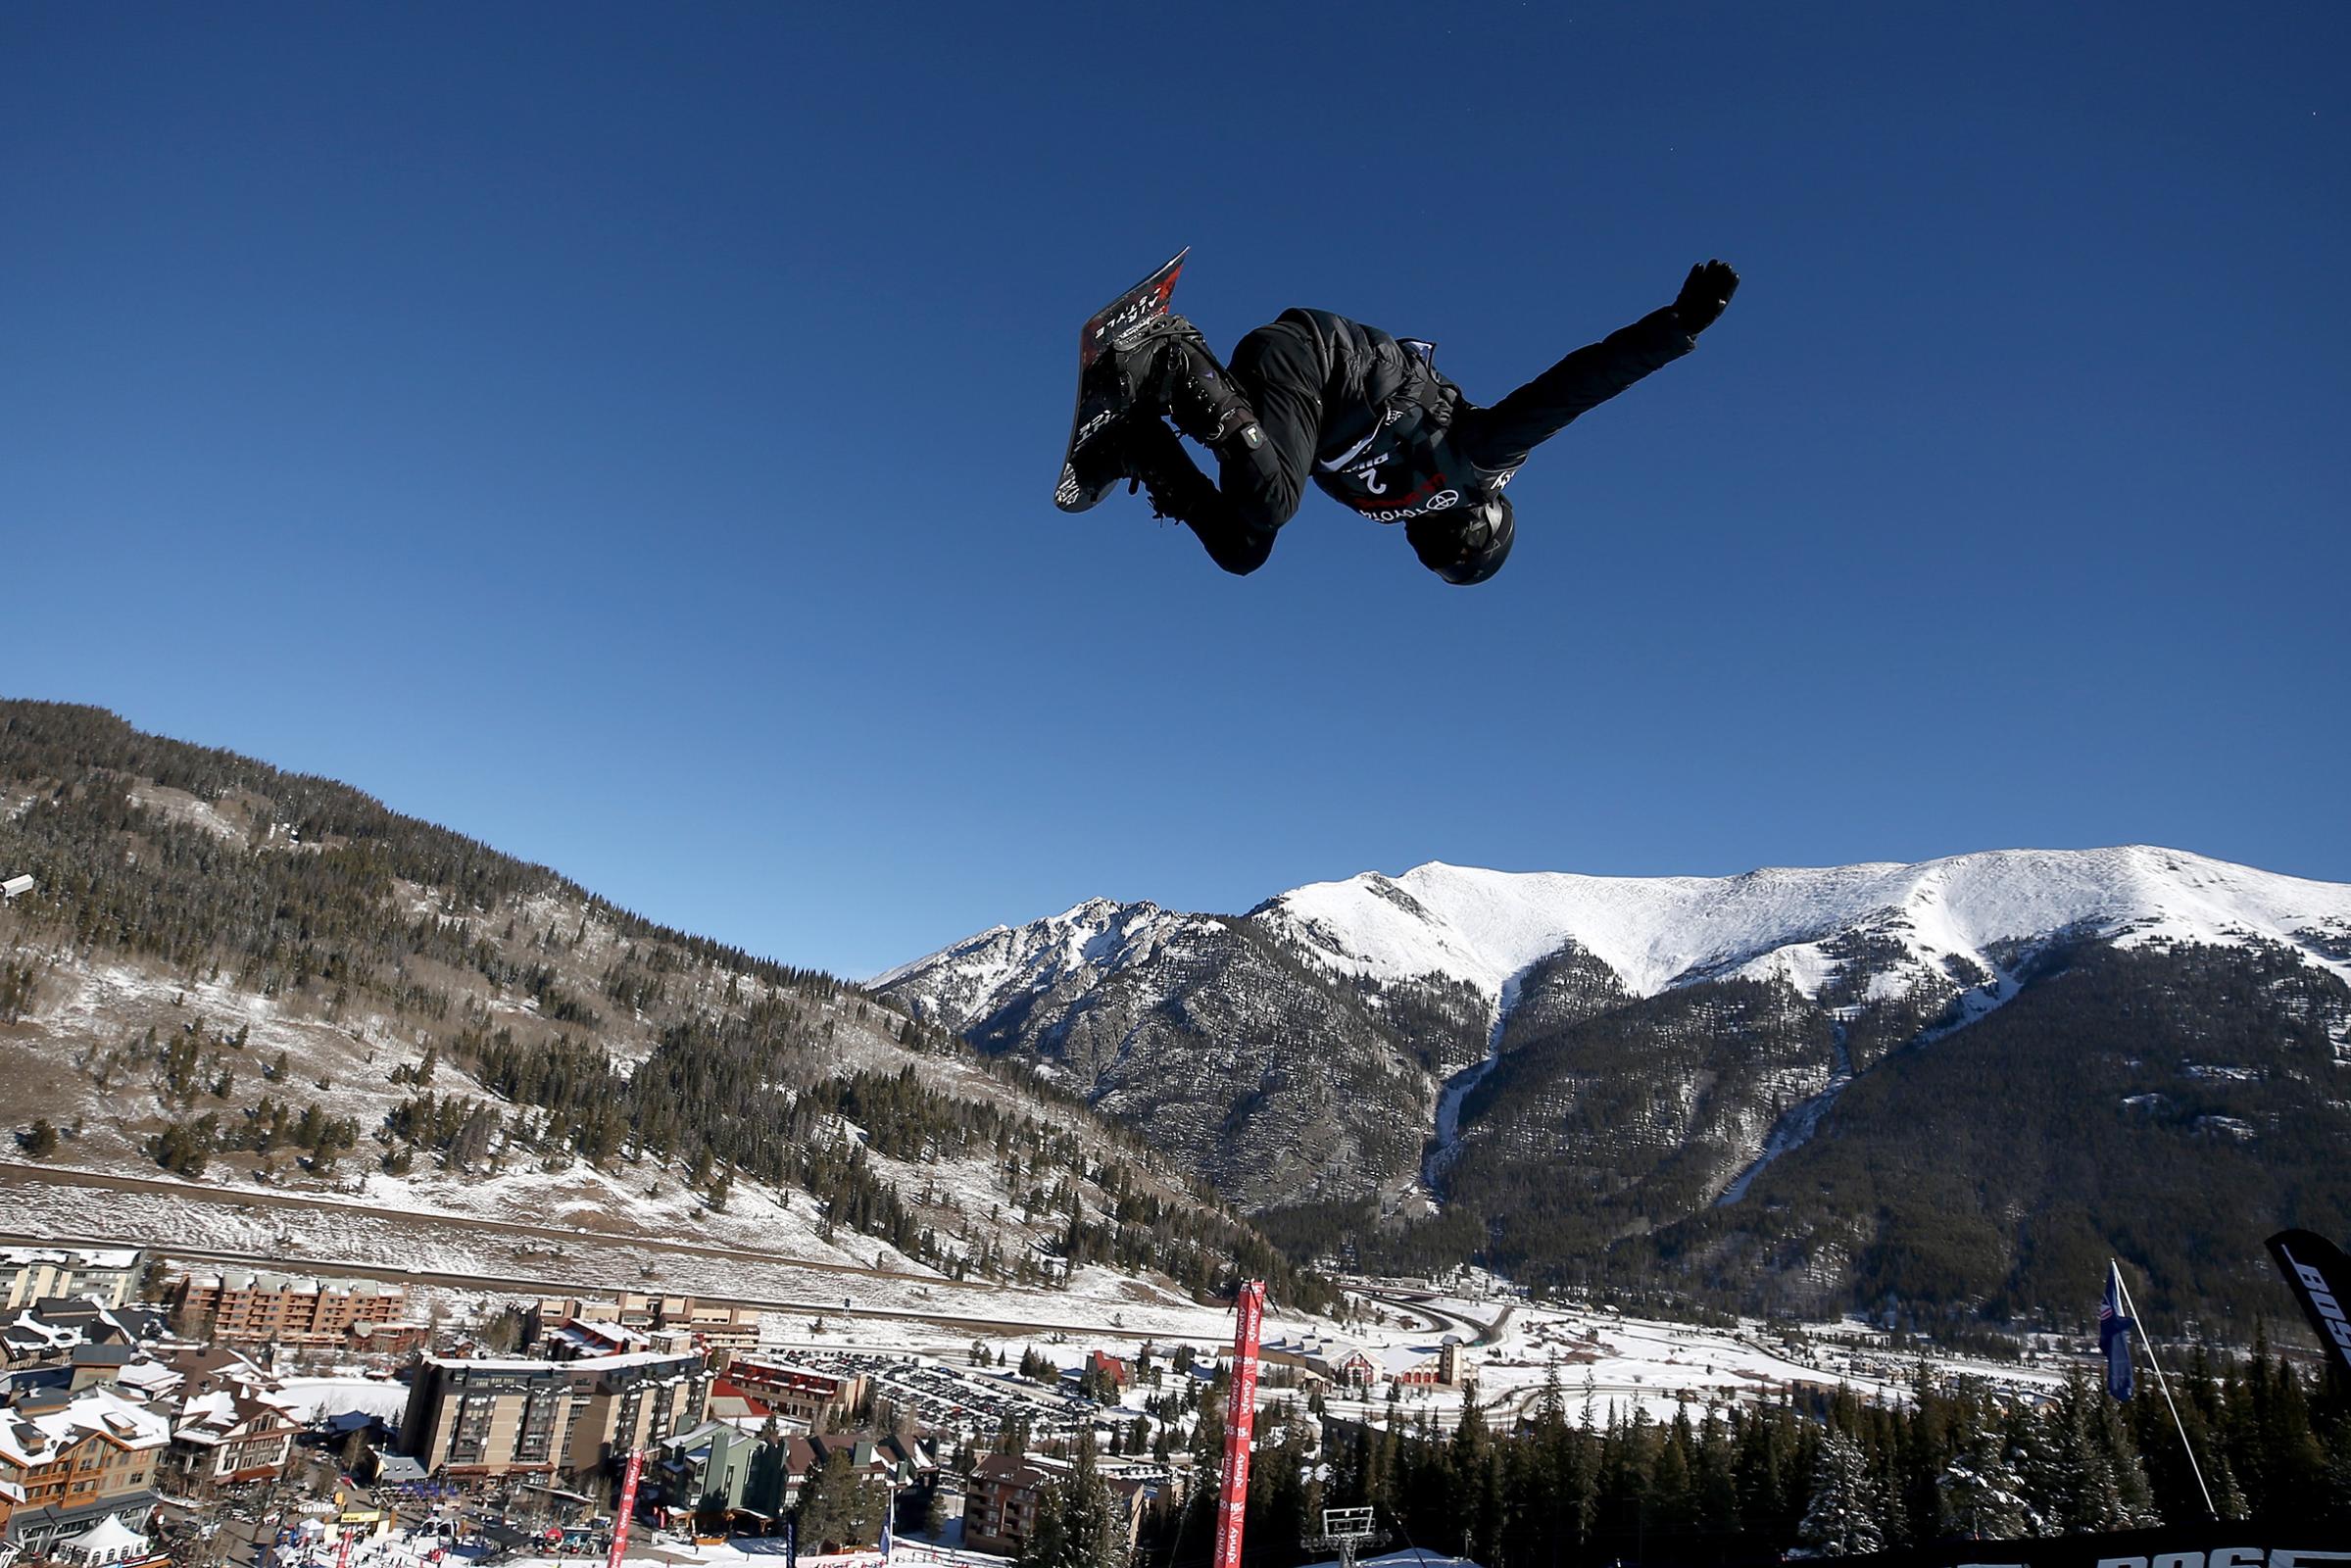 Shaun White of the United States competes in the finals of the FIS Snowboard World Cup 2018 Men's Snowboard Halfpipe in Copper Mountain, Colo., on Dec. 9, 2017.